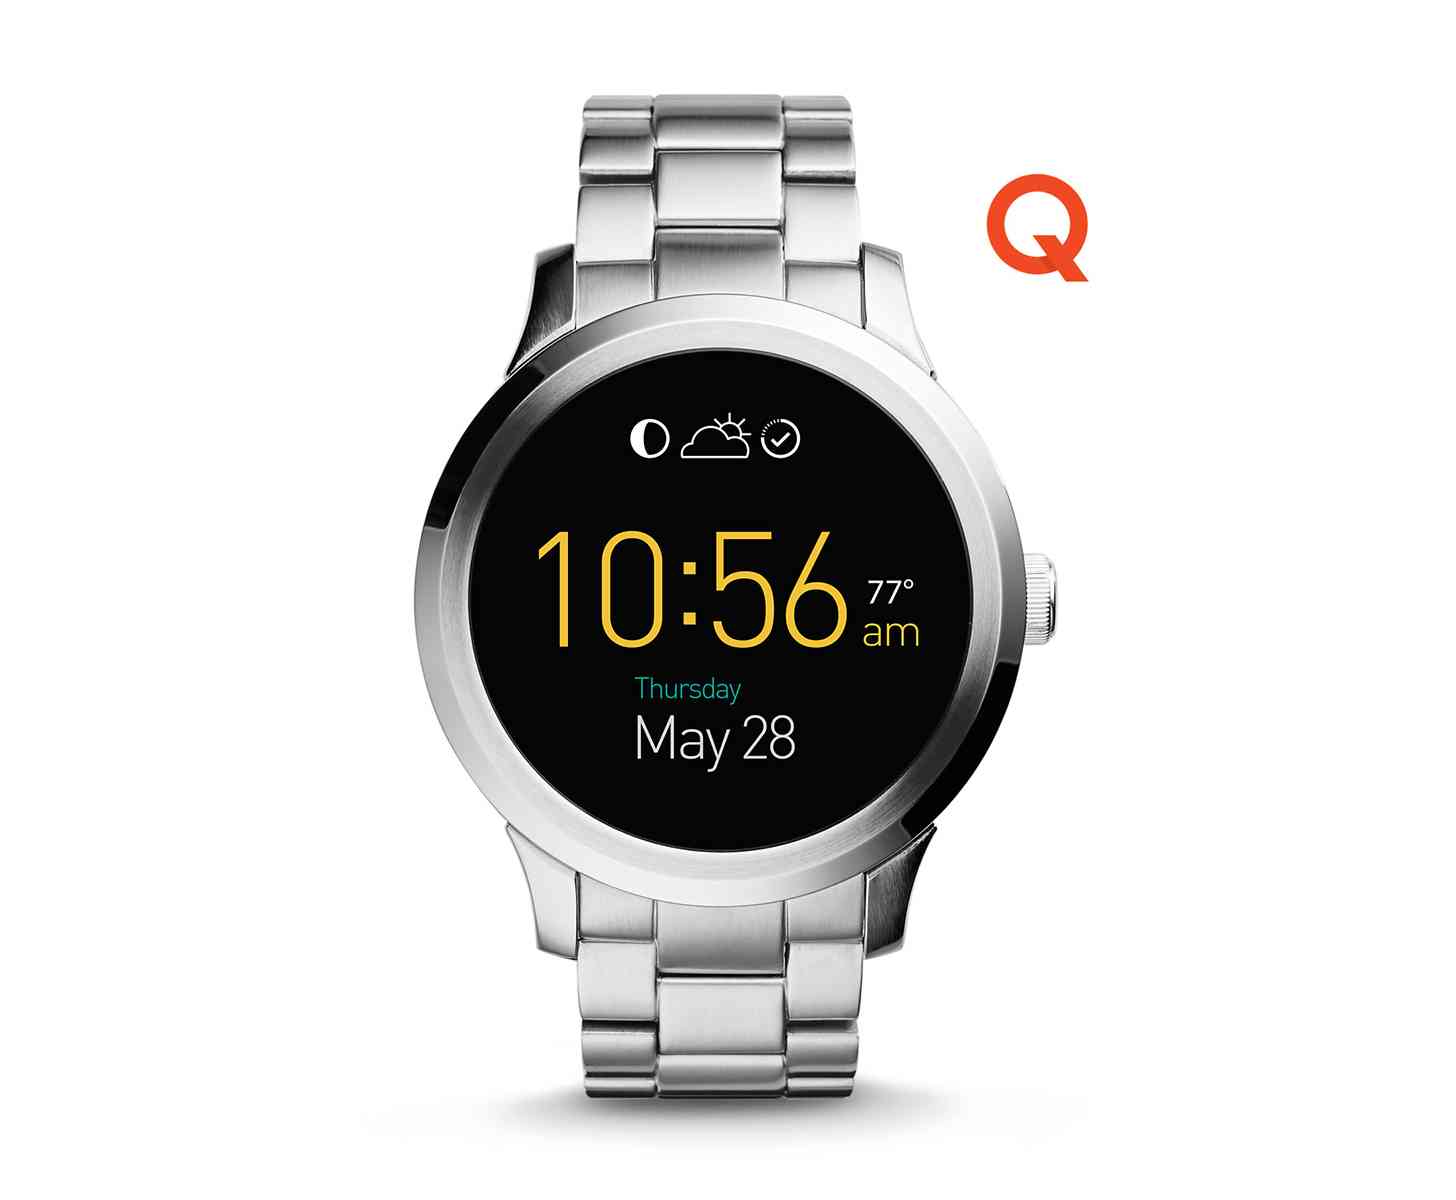 Fossil Q Founder large